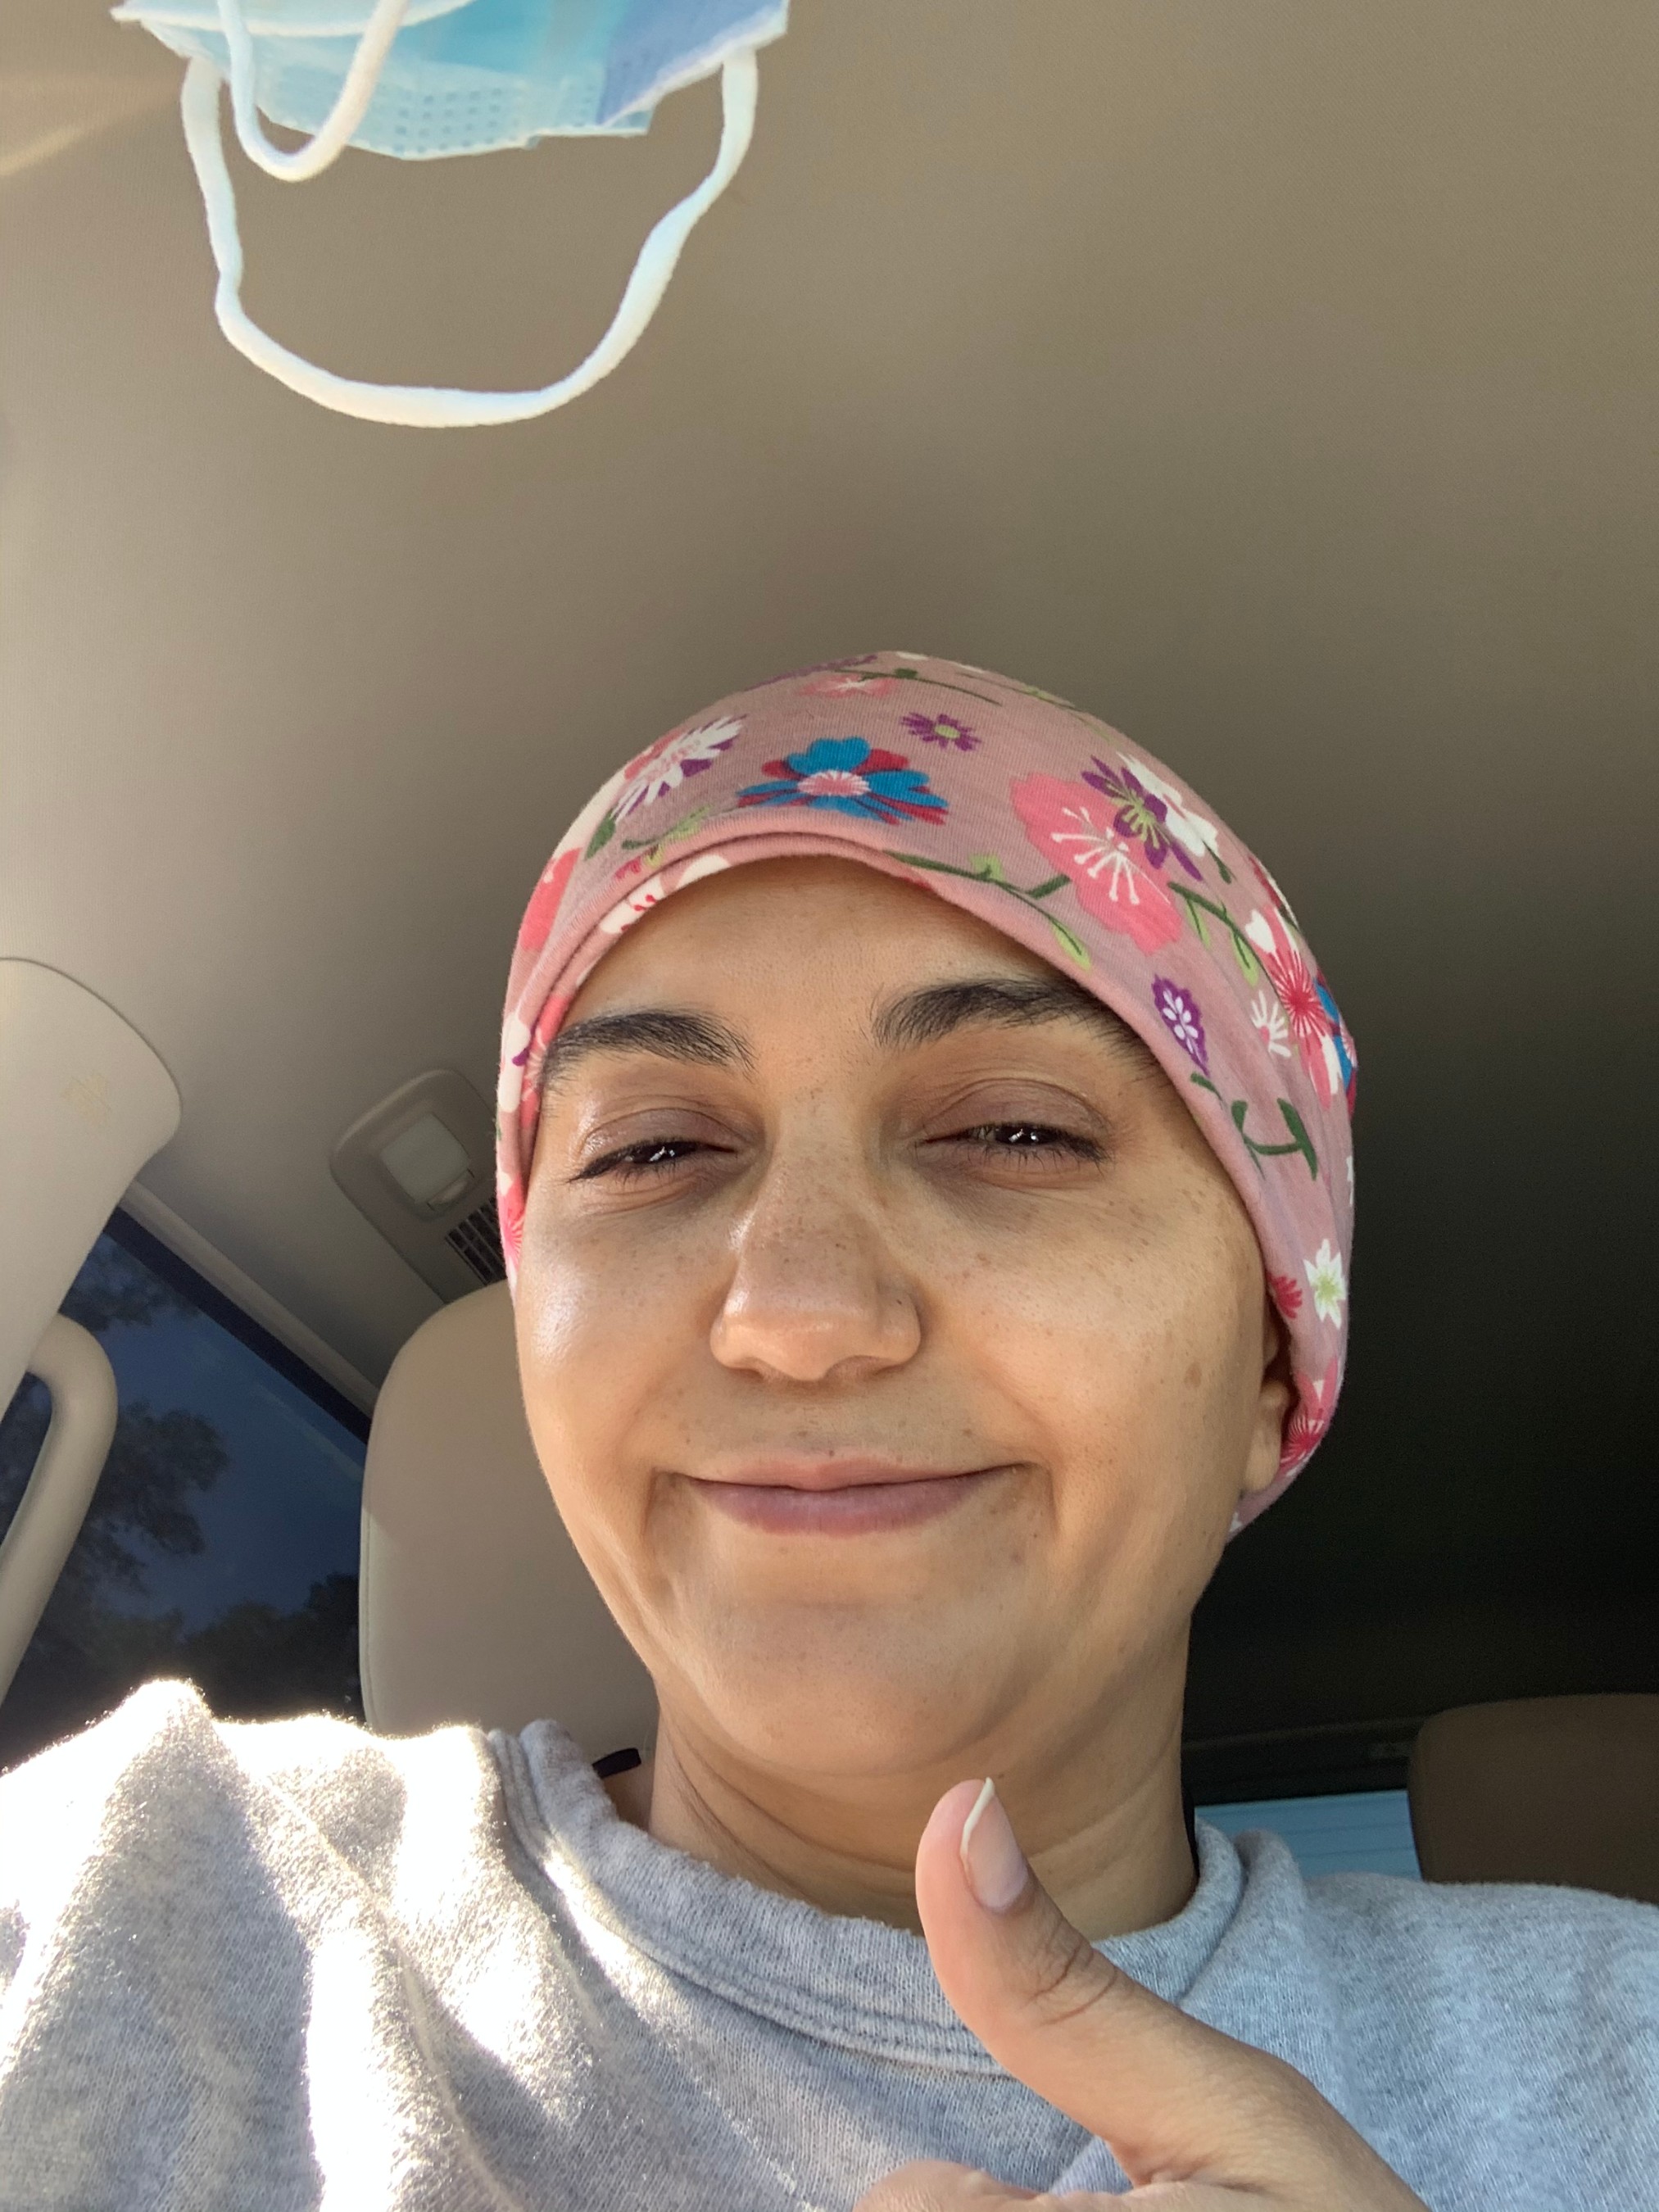 Dima K., living with low-grade serous ovarian cancer